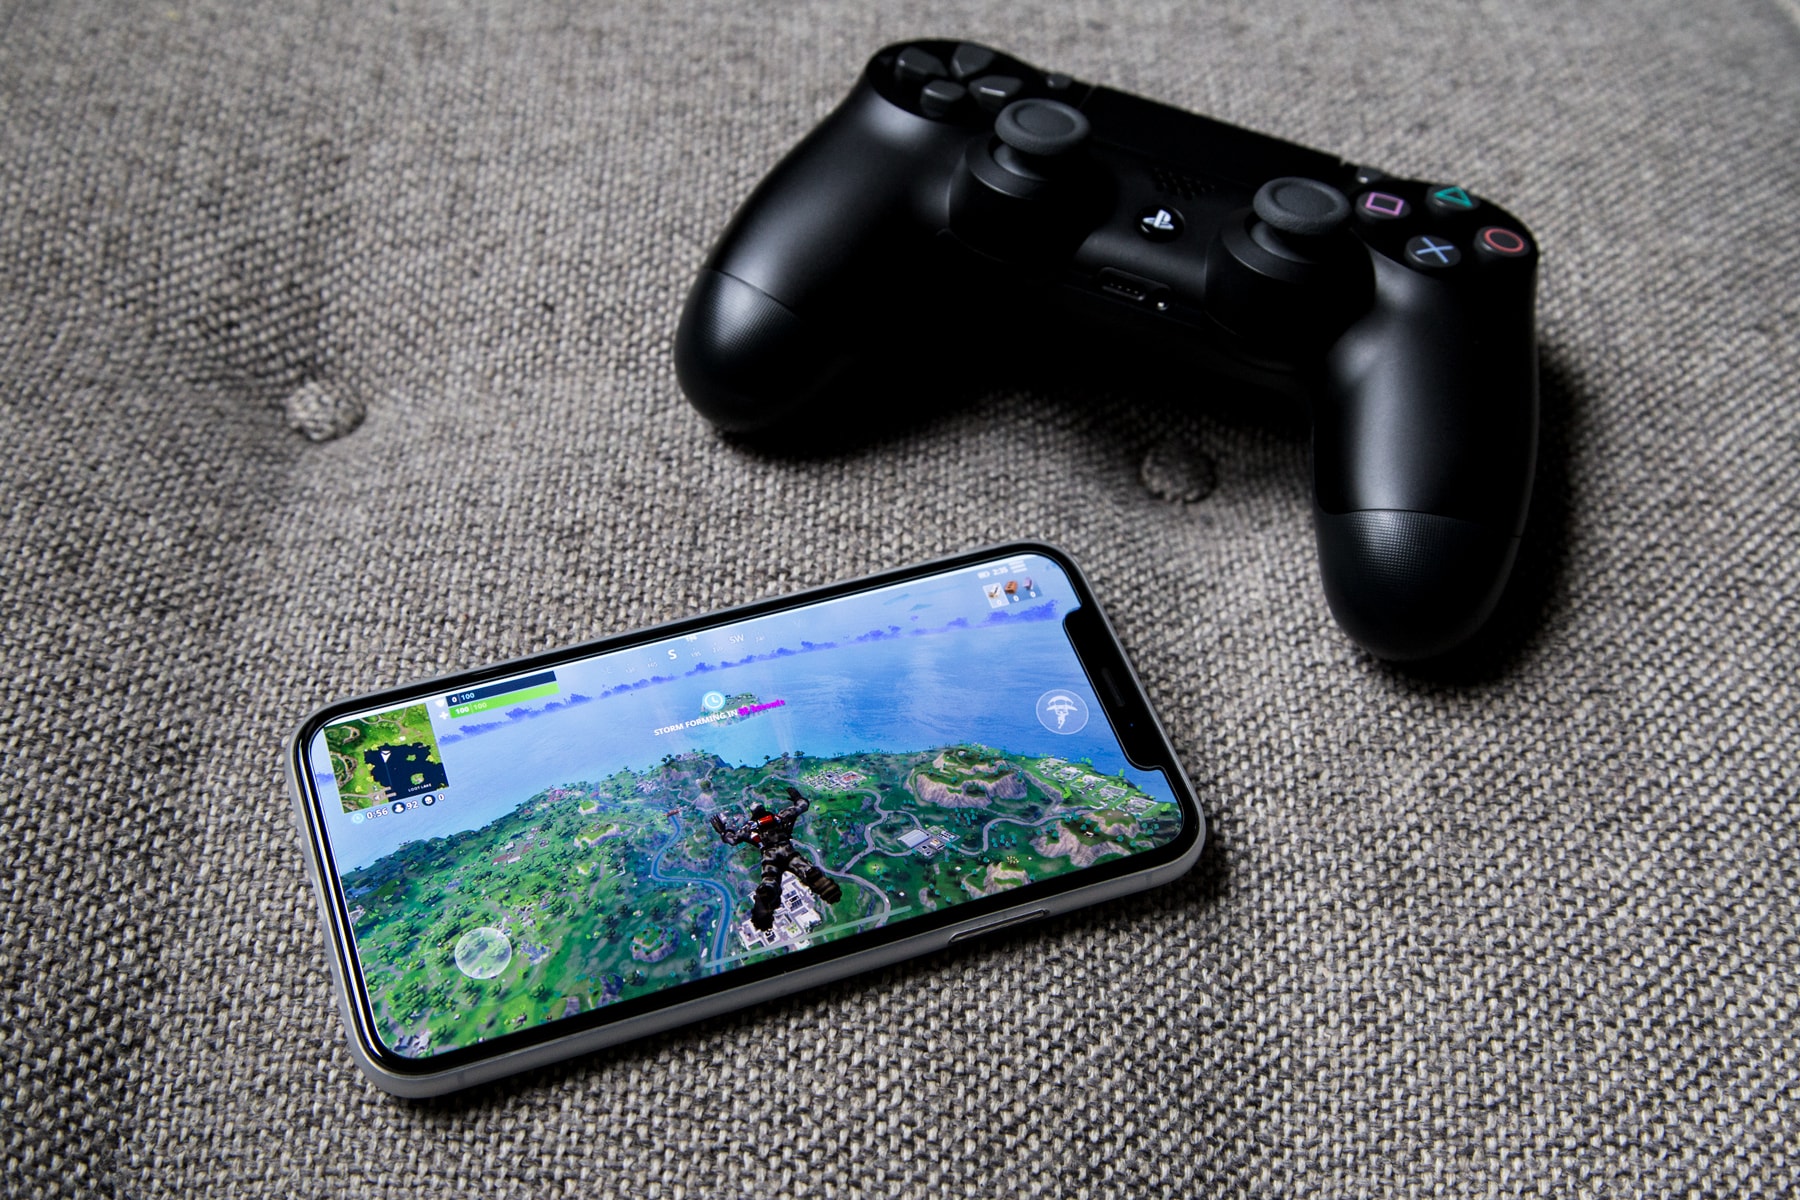 Fortnite Mobile iOS update: Epic Games download open to everyone, Gaming, Entertainment